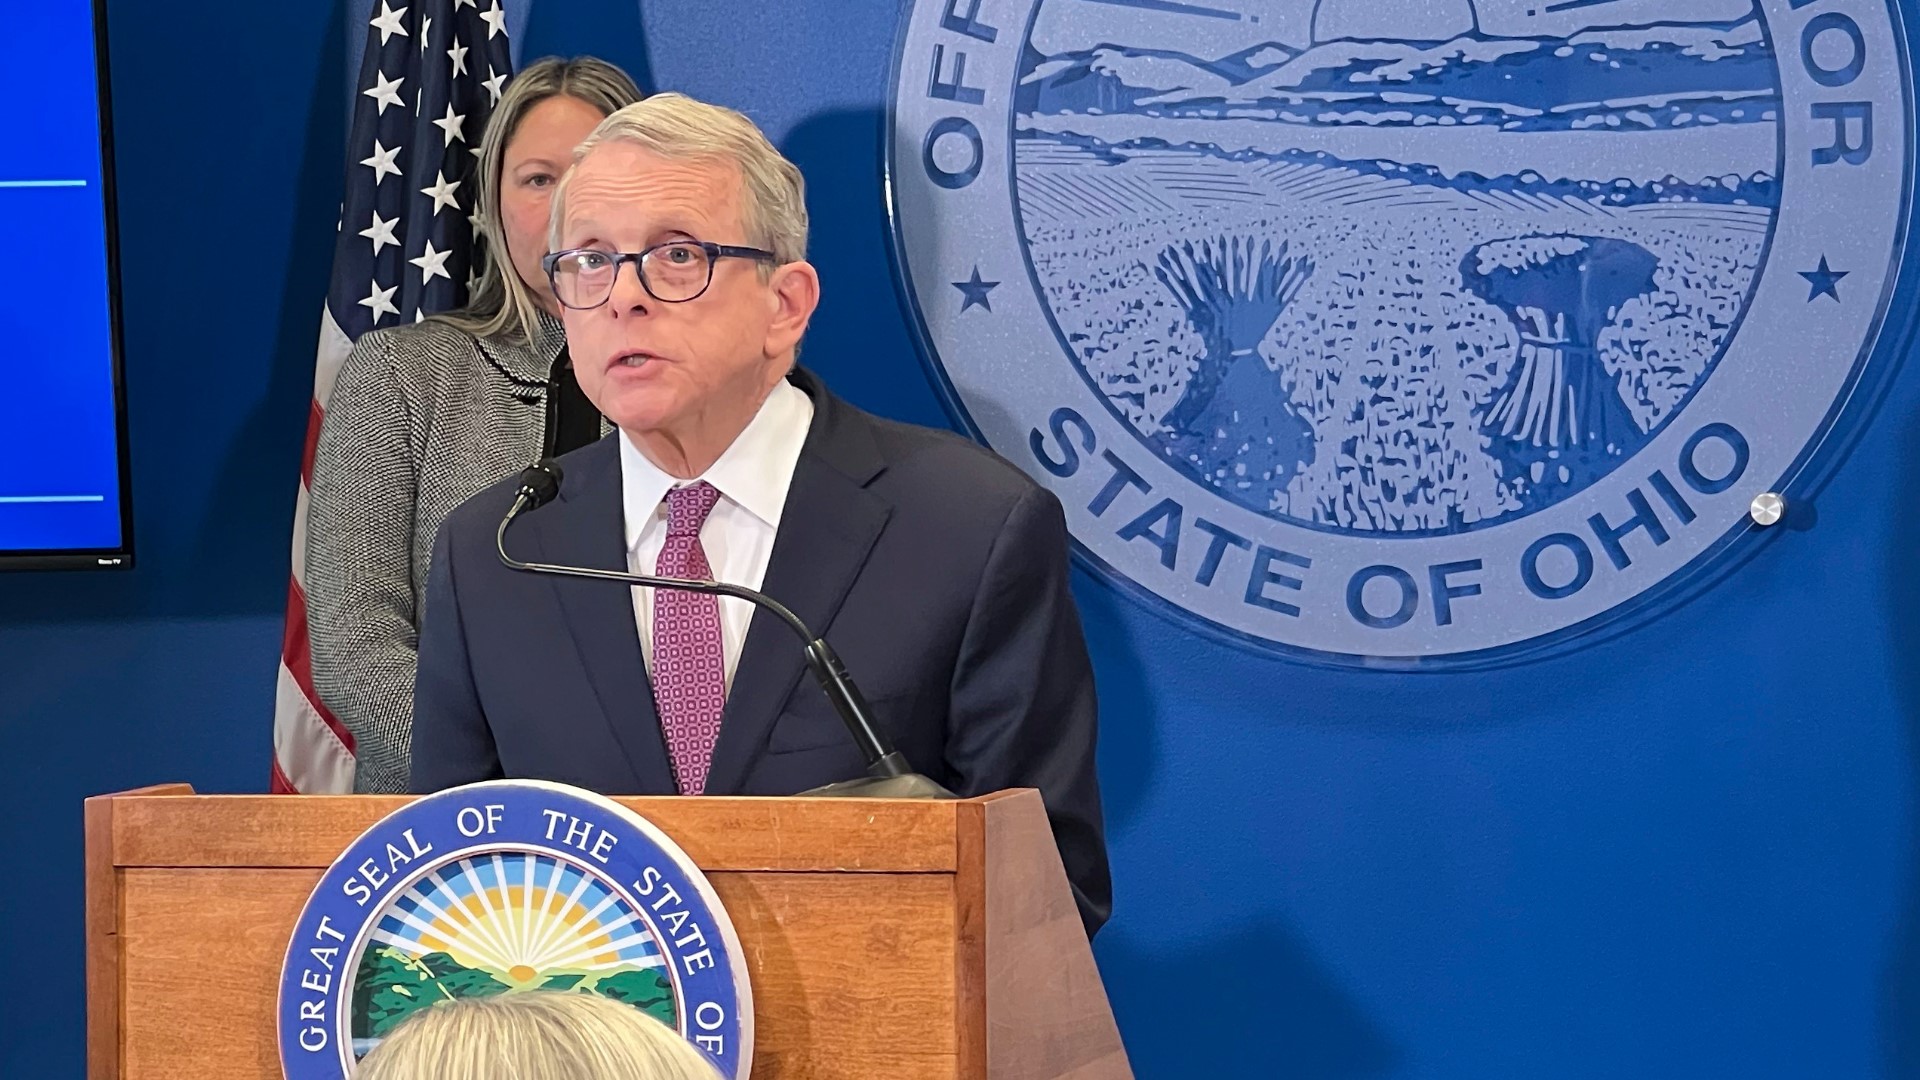 Gov. Mike DeWine is providing an update on the effects of the train derailment that happened in East Palestine nearly two weeks ago.